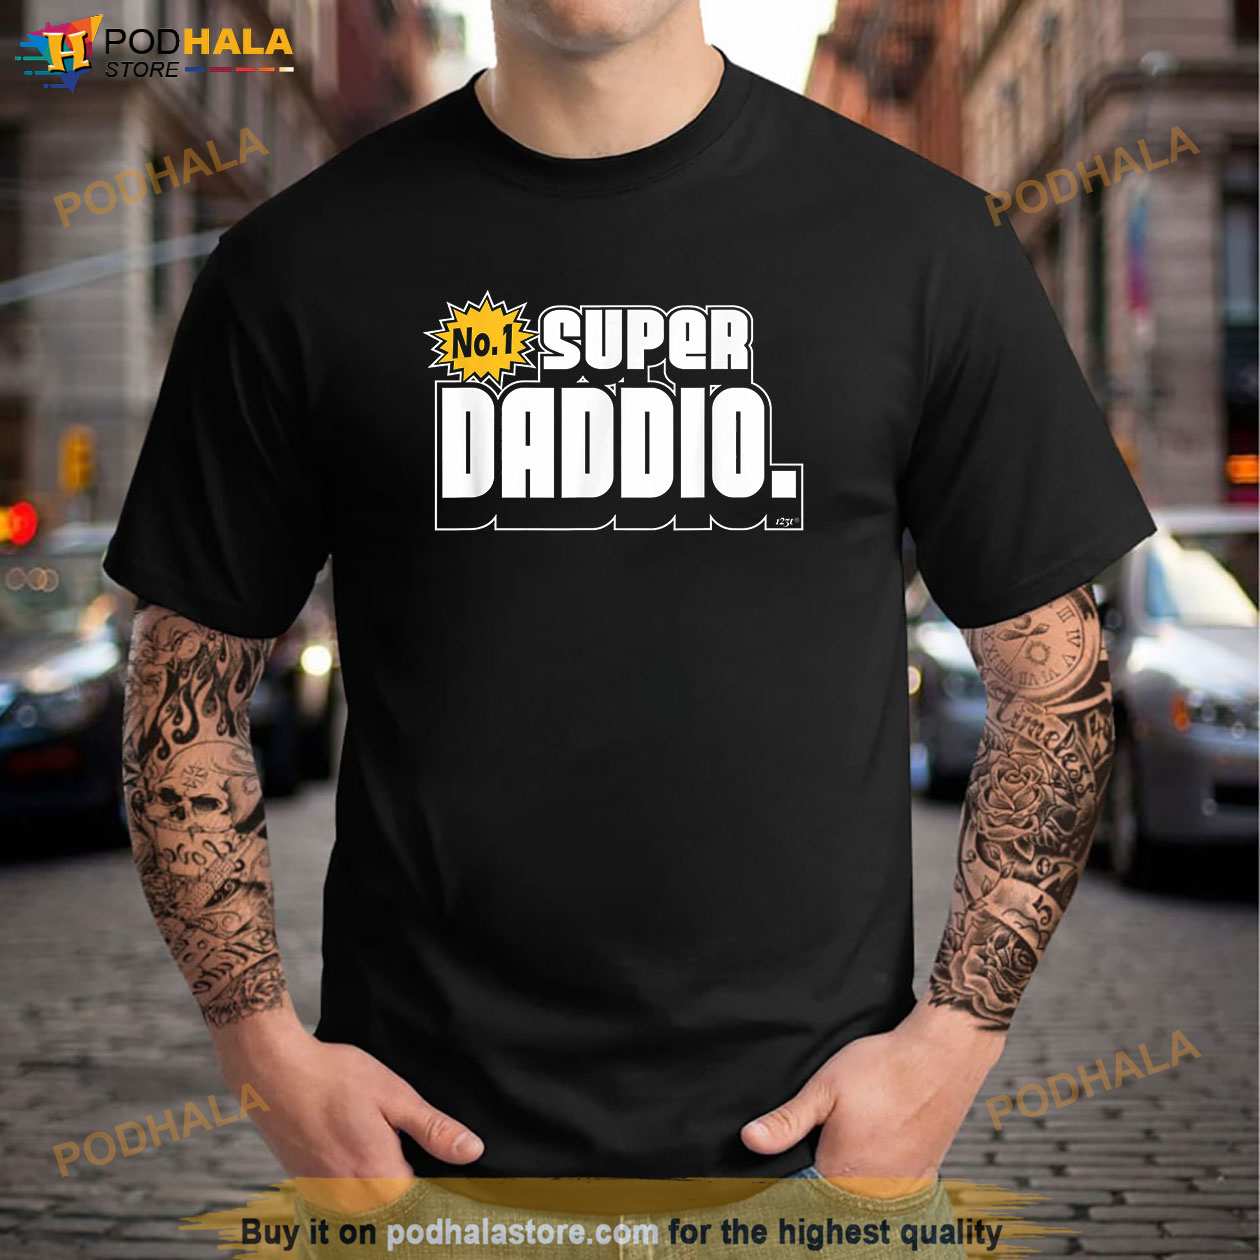 Novelty Super Daddio Funny Tee T Fathers Day Gift - Bring Your Thoughts Imaginations Into Reality Today